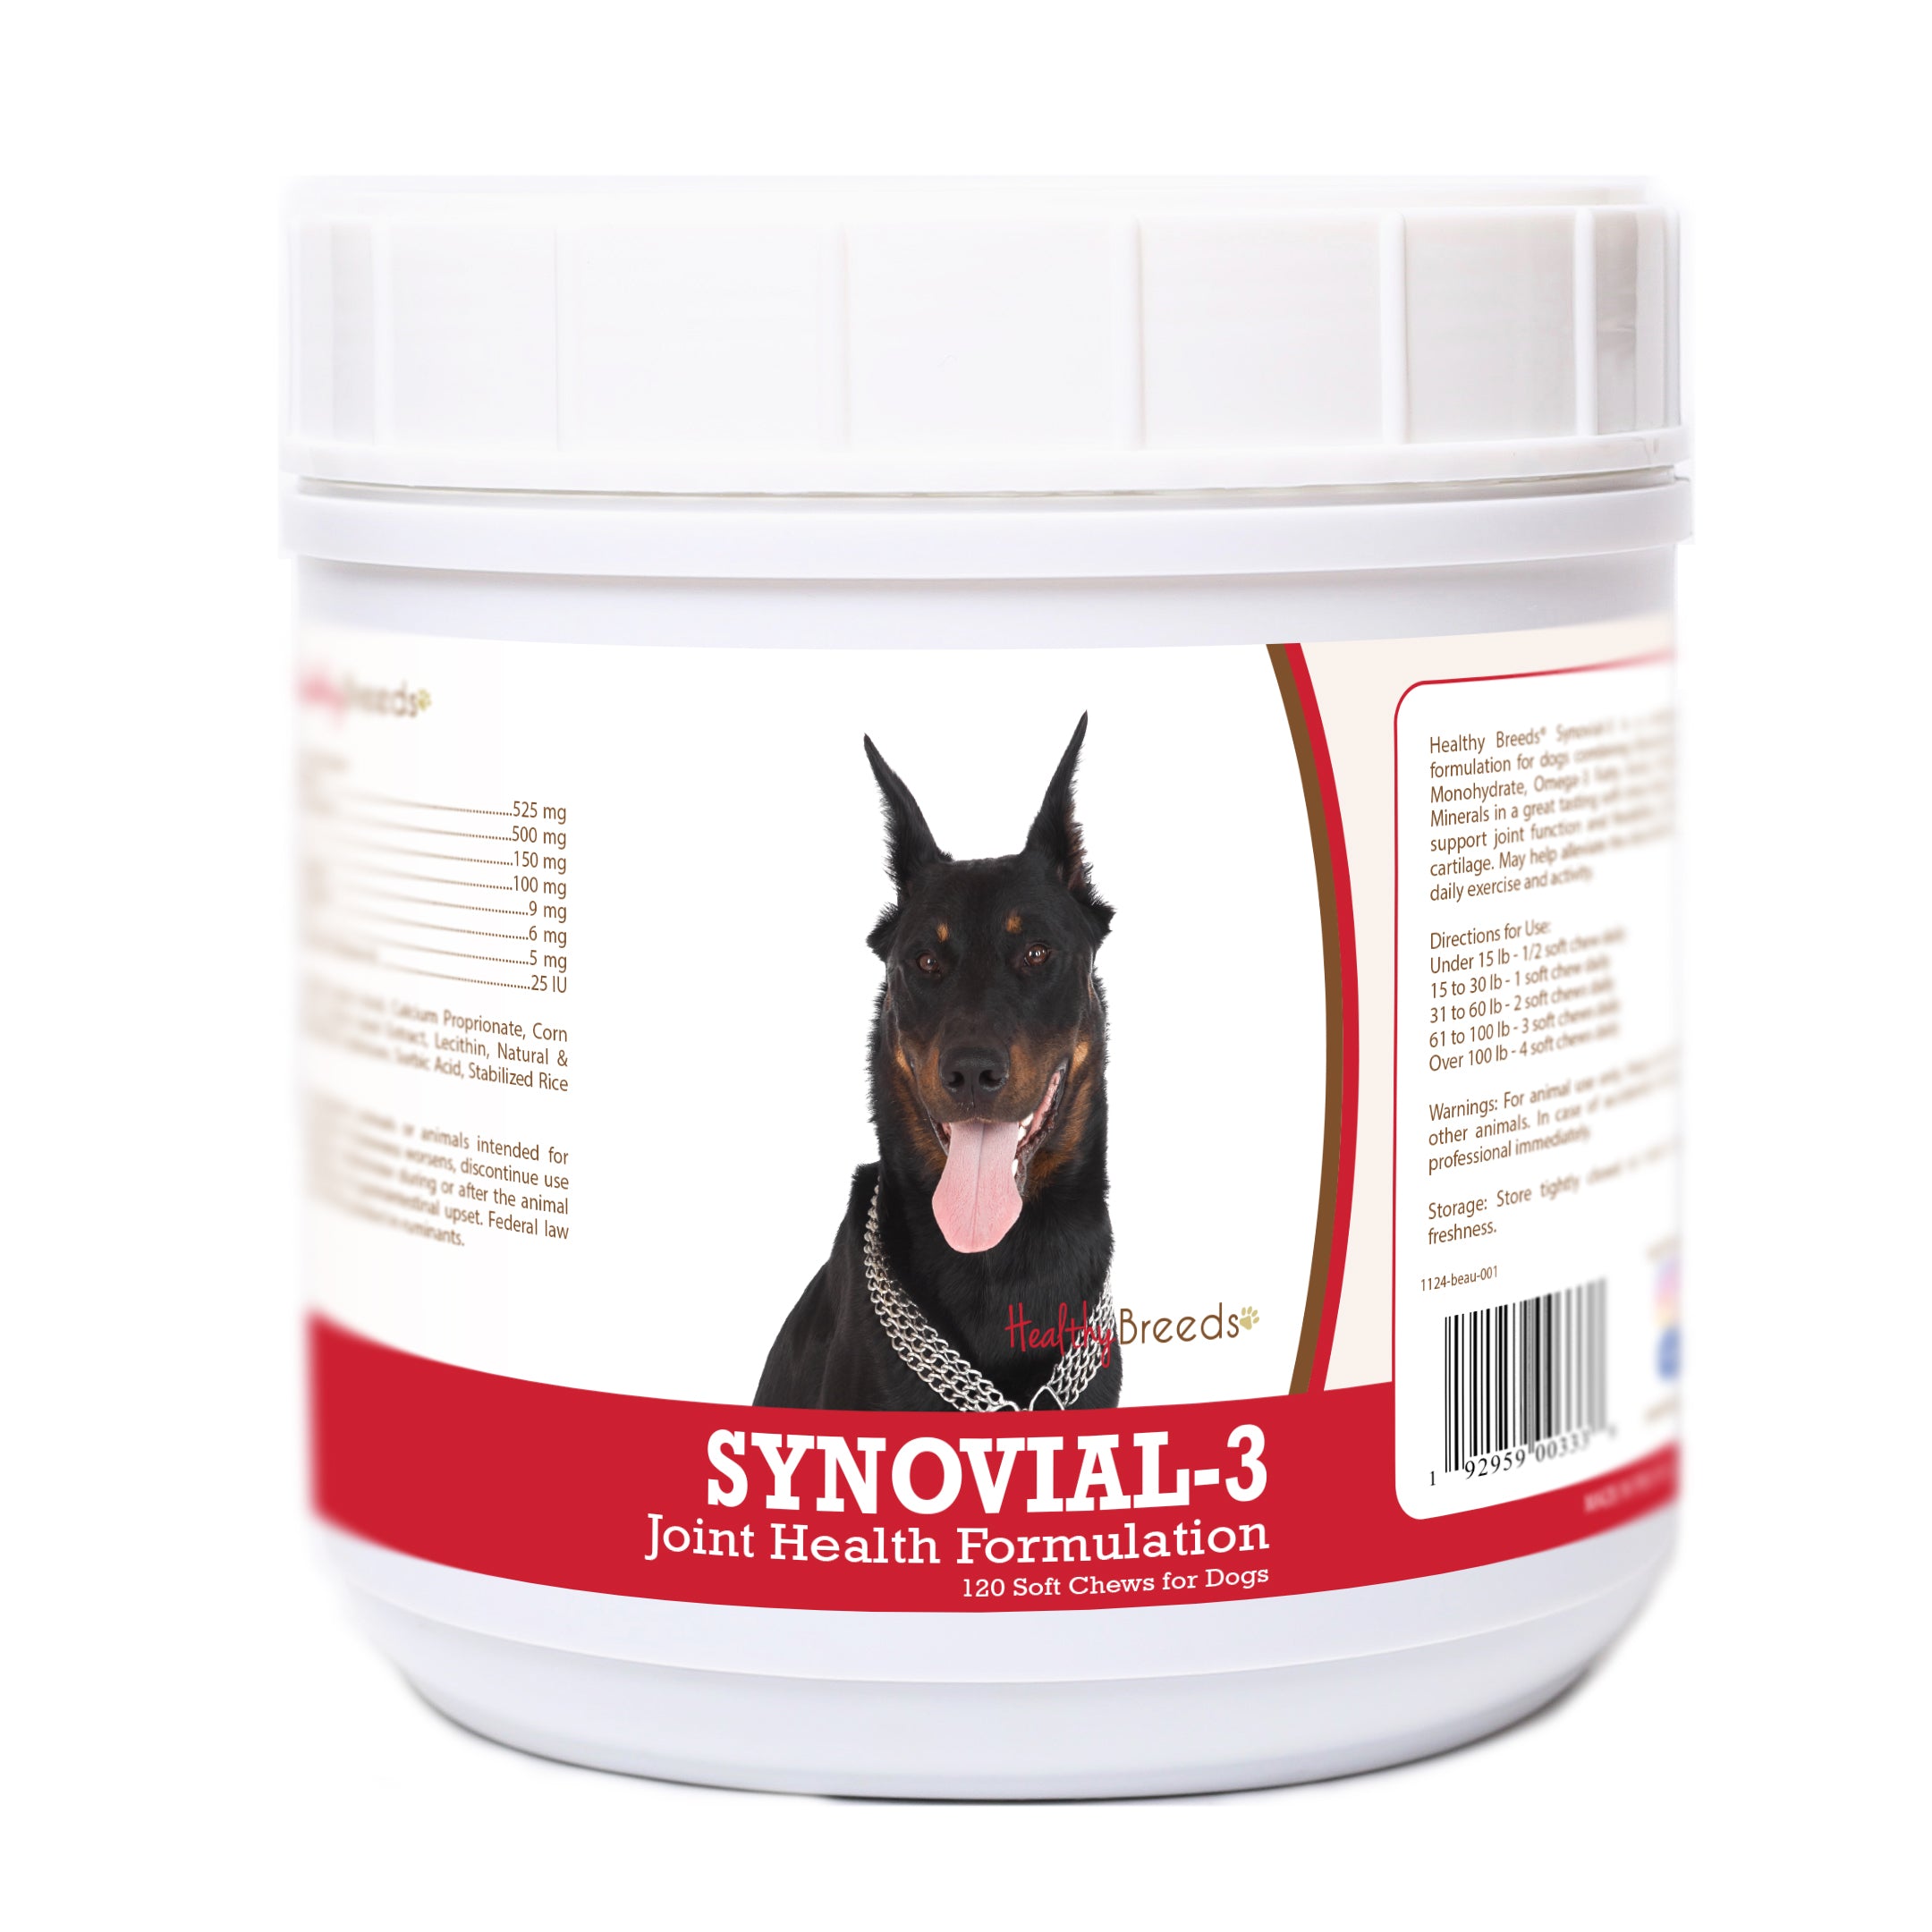 Beauceron Synovial-3 Joint Health Formulation Soft Chews 120 Count